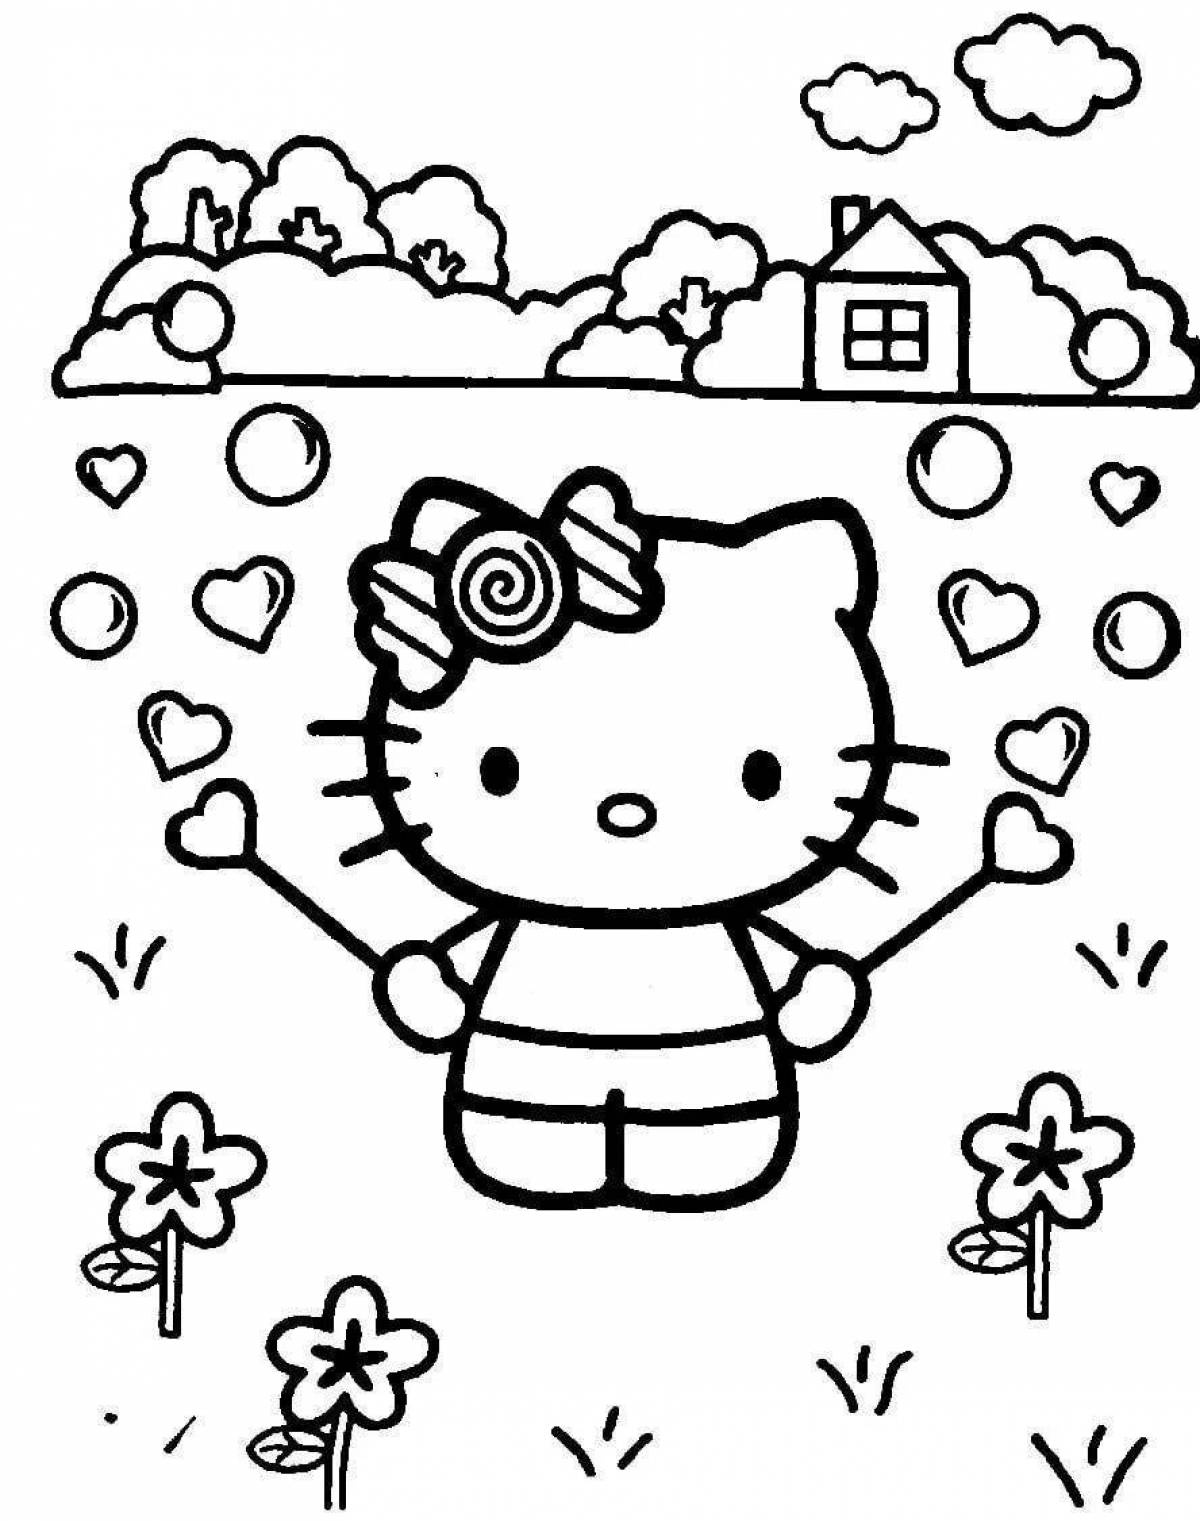 Kitty for kids #6